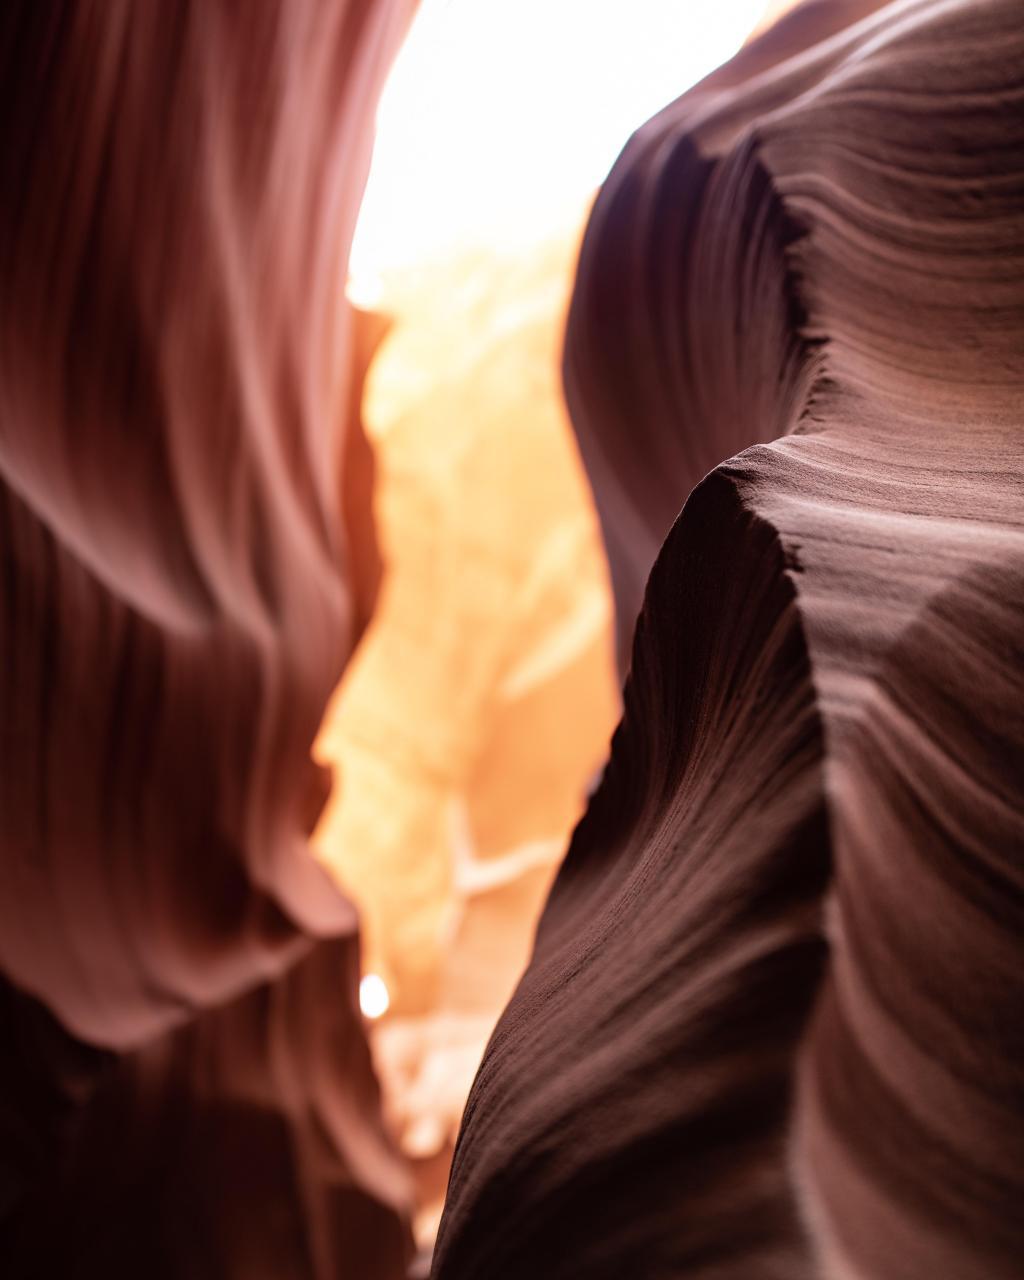 The texture in Antelope Canyon is just unbelievable. Lower Antelope